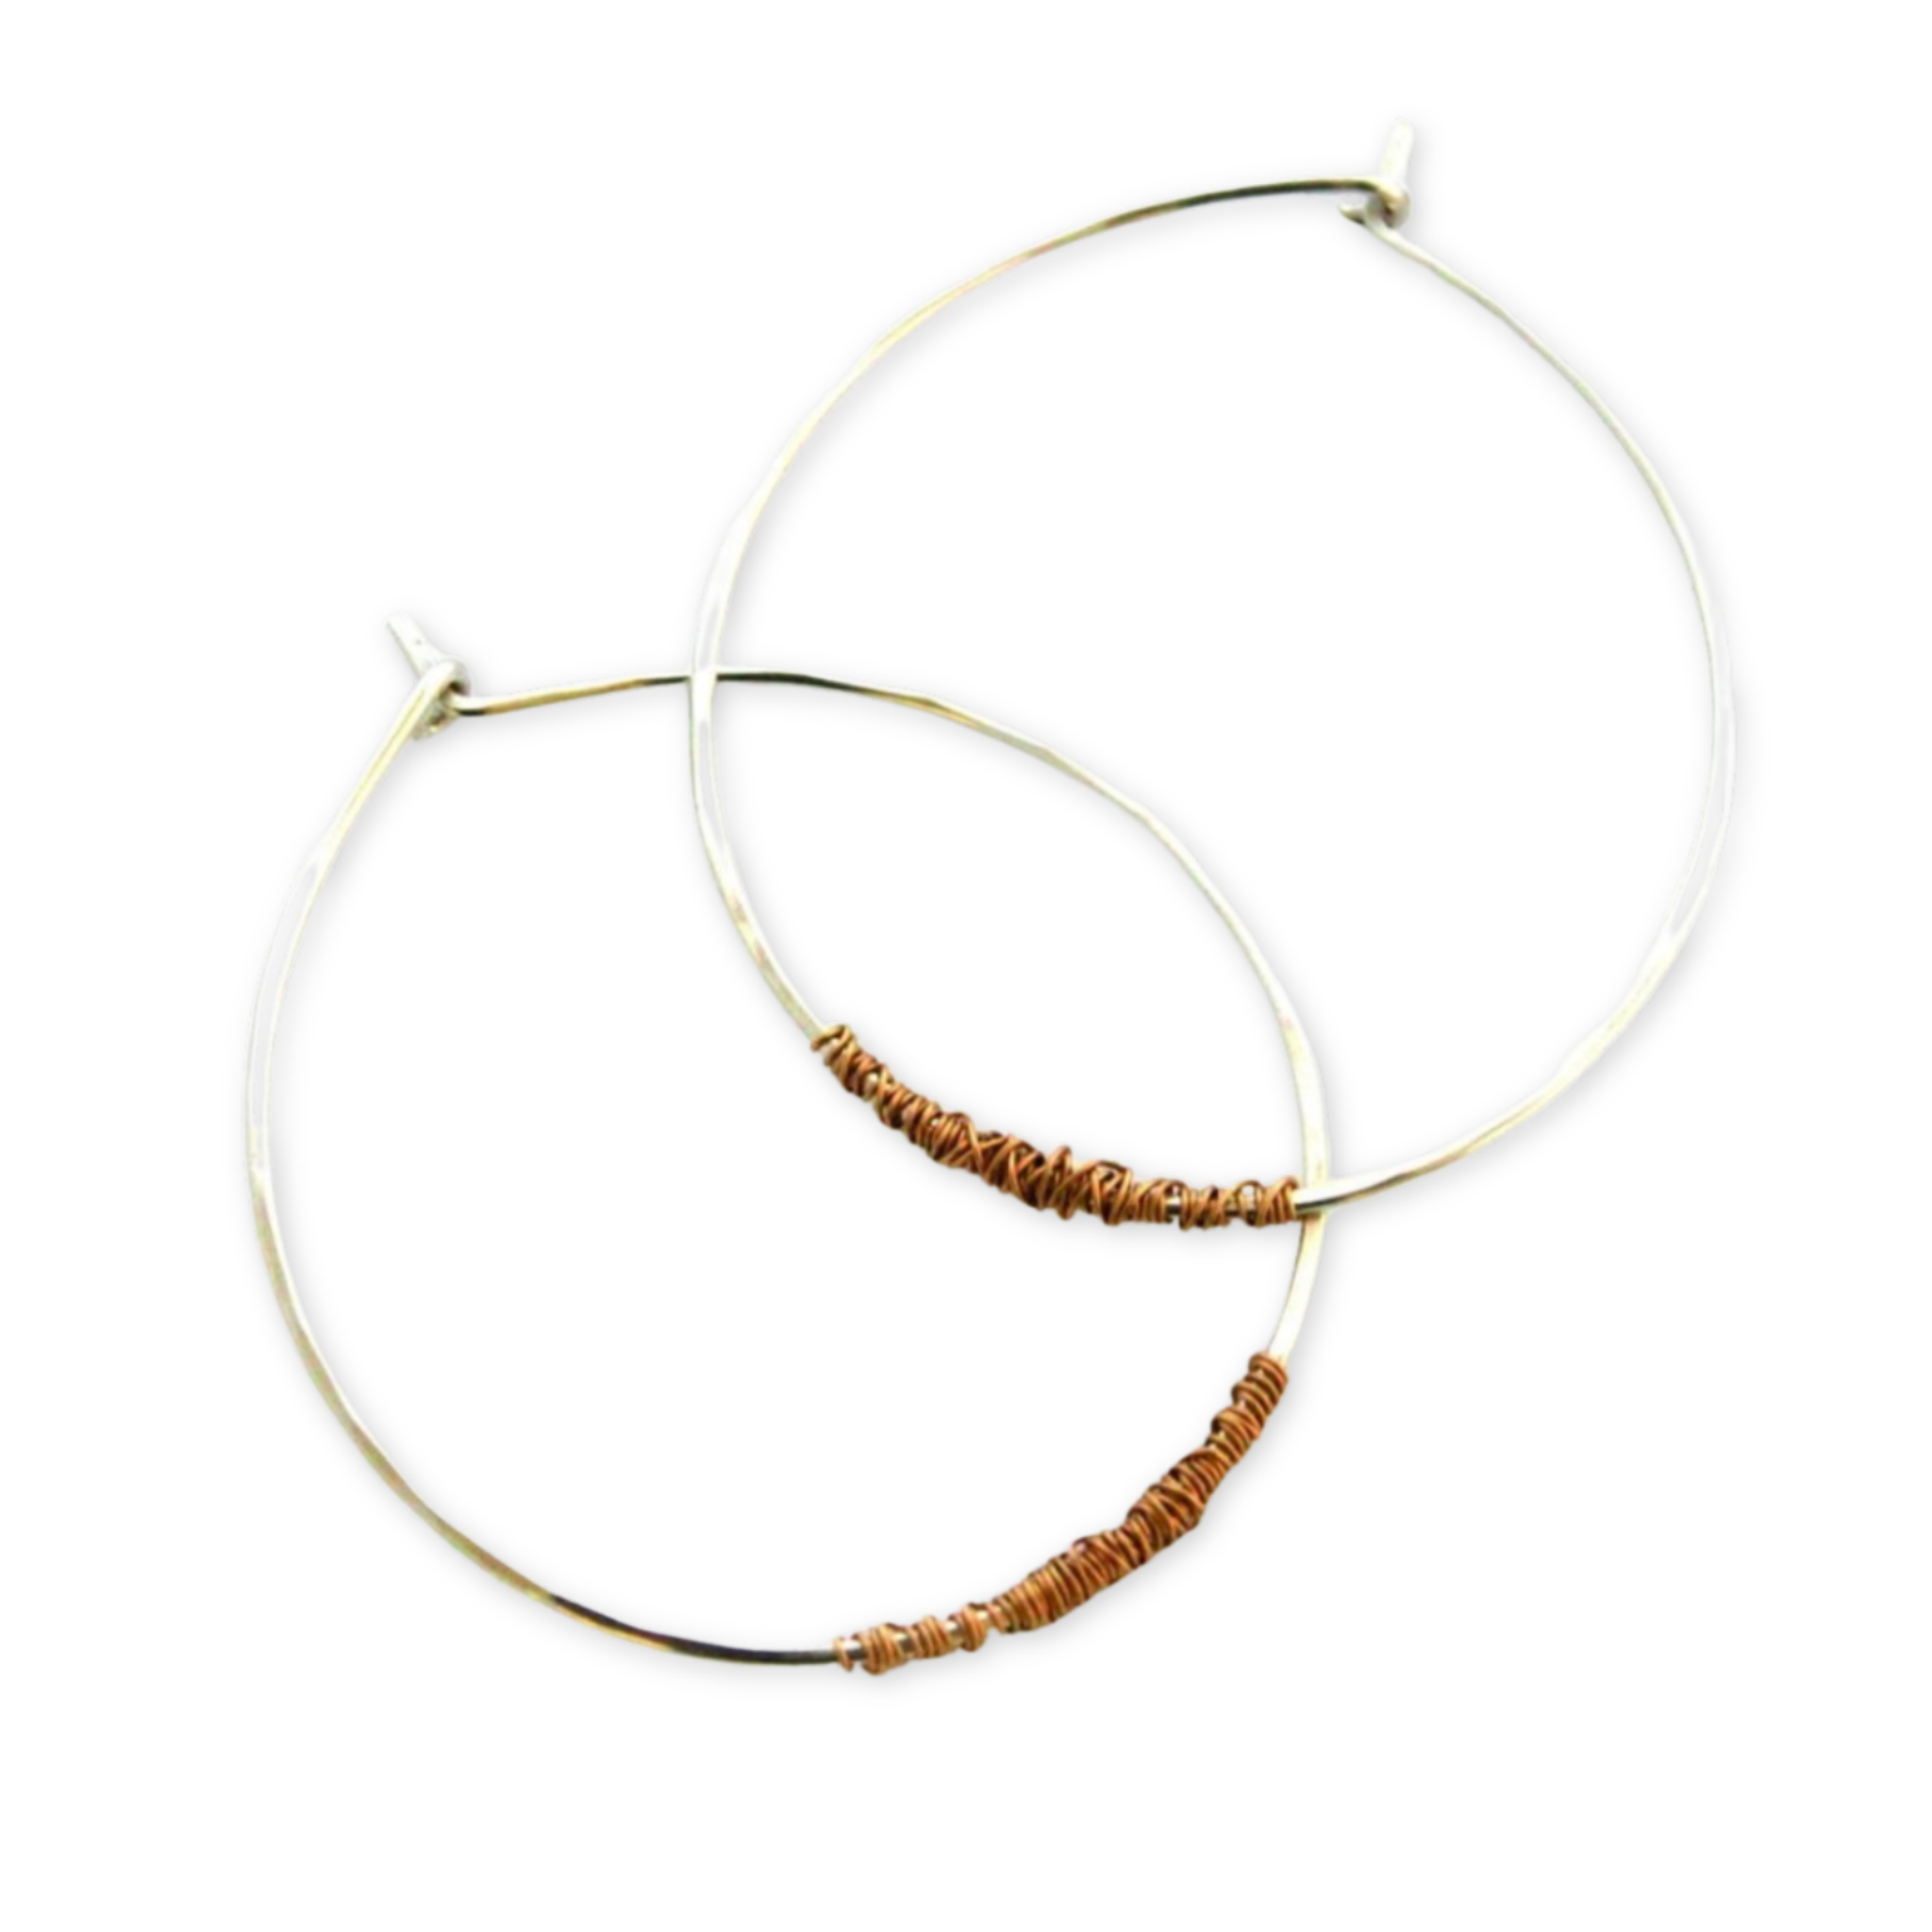 hand forged hoop earrings with wire wrapping